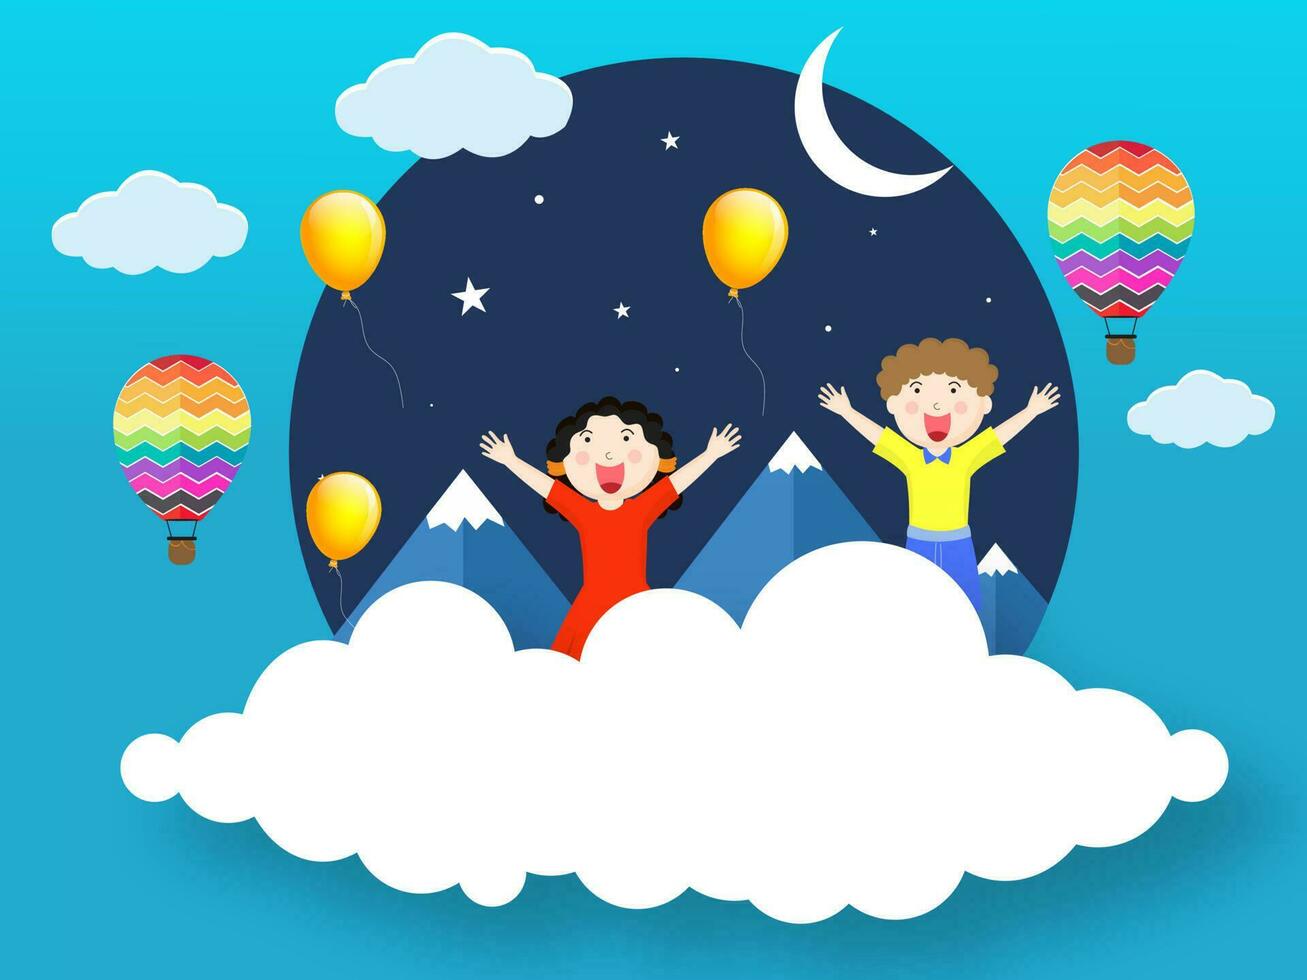 Enjoying little boy and girl character with mountains and balloons on half moon night background for Happy Children's Day celebration. vector